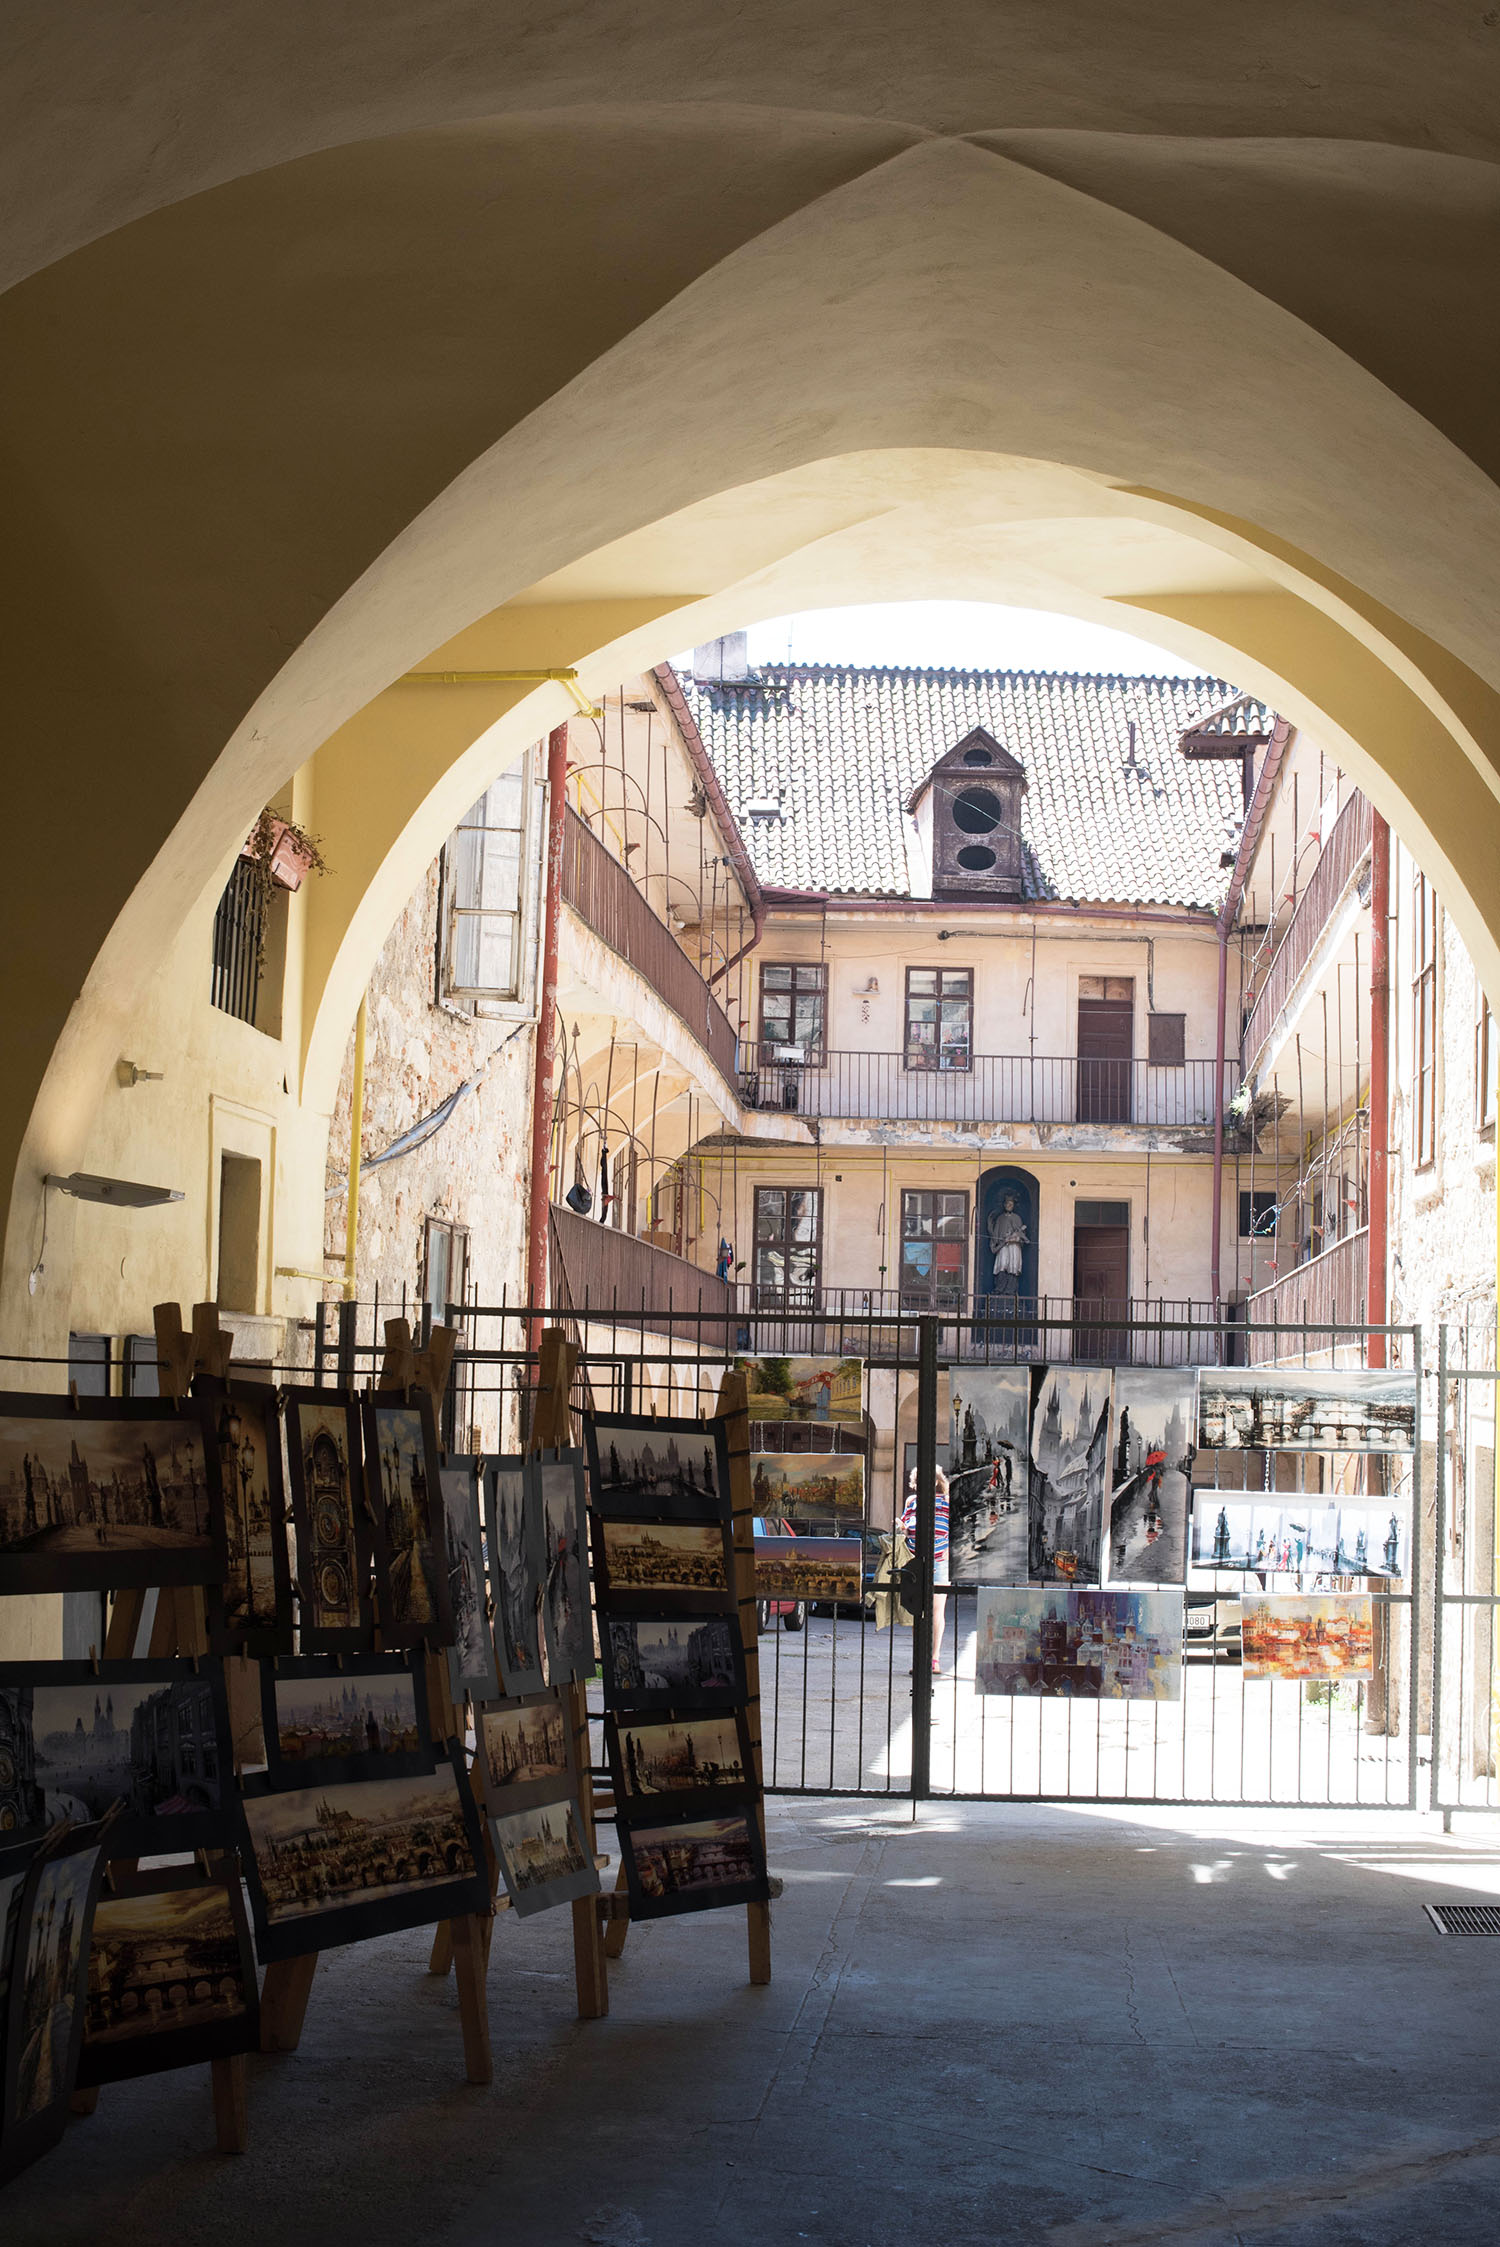 Paintings for sale under a medieval archway in Prague, as captured by travel blogger Cee Fardoe of Coco & Vera